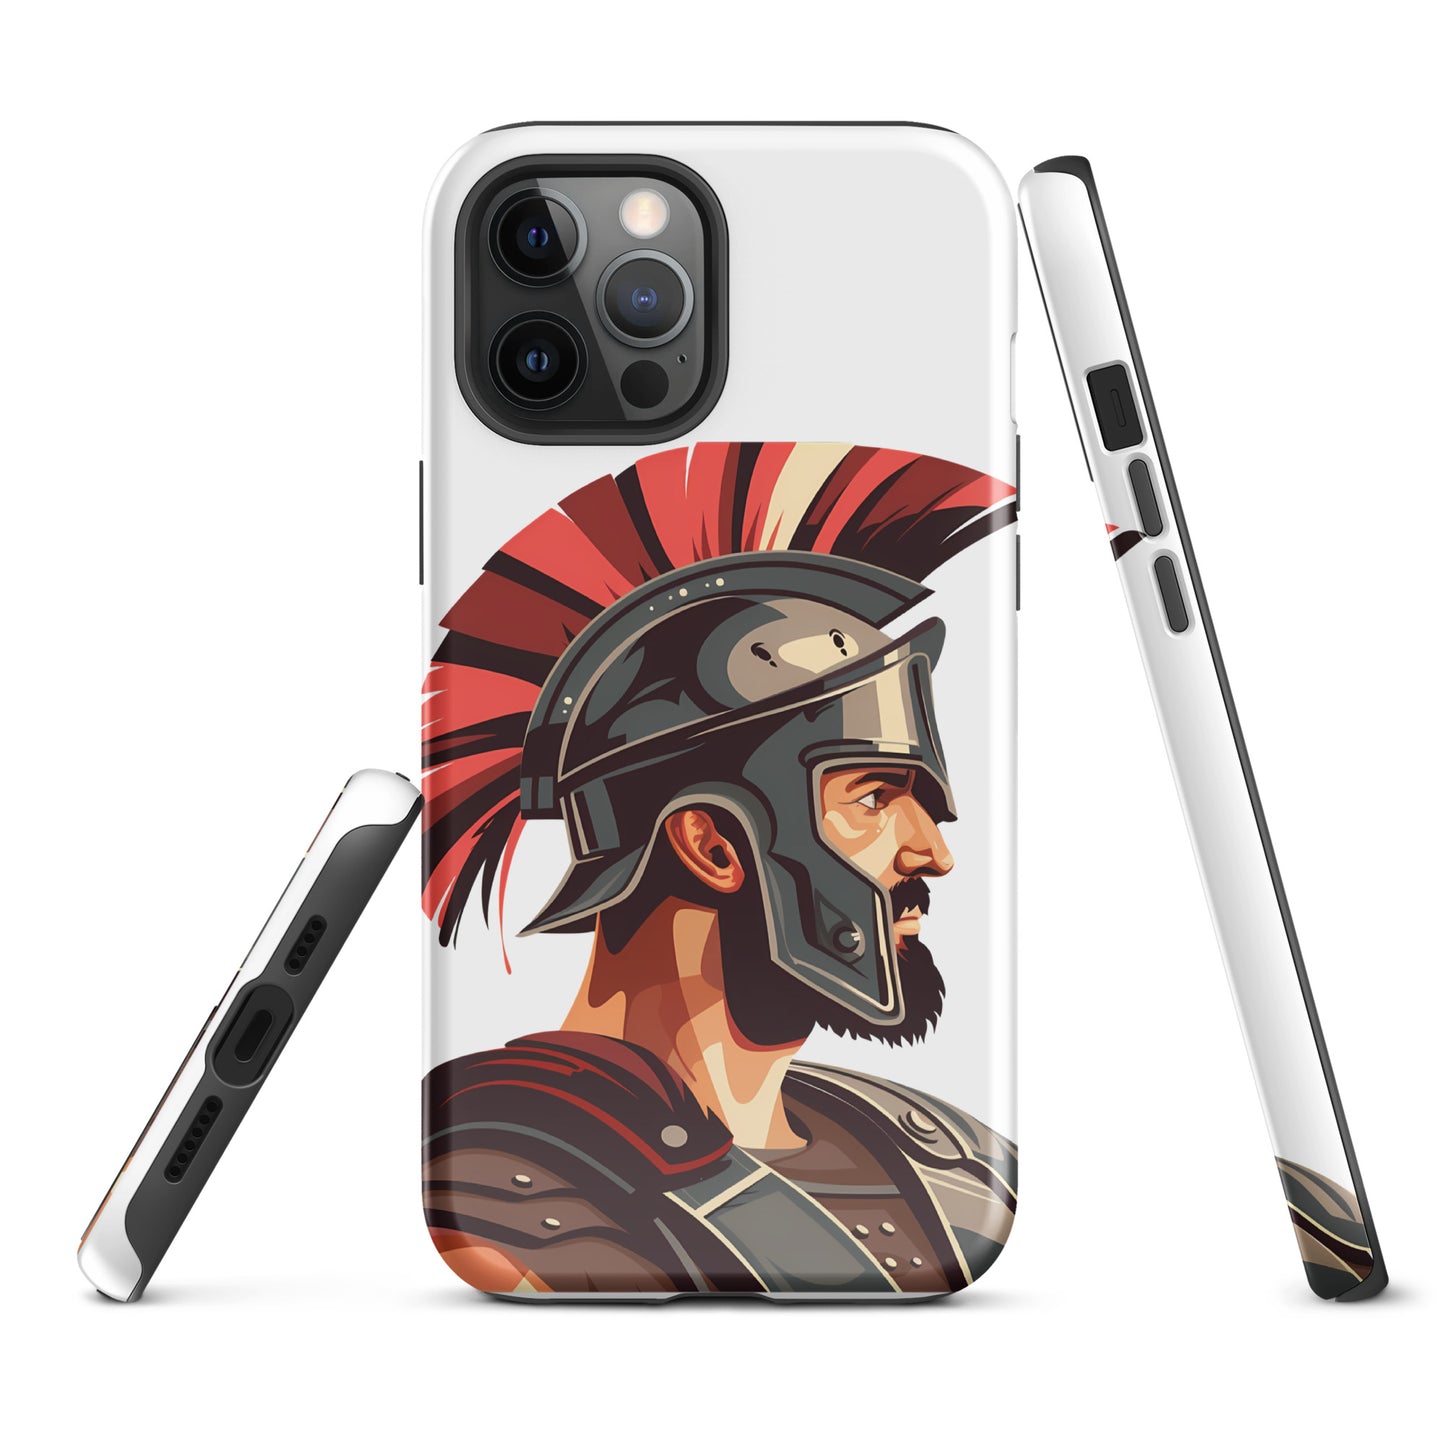 Glossy Tough Case for Iphone with a print of a warrior